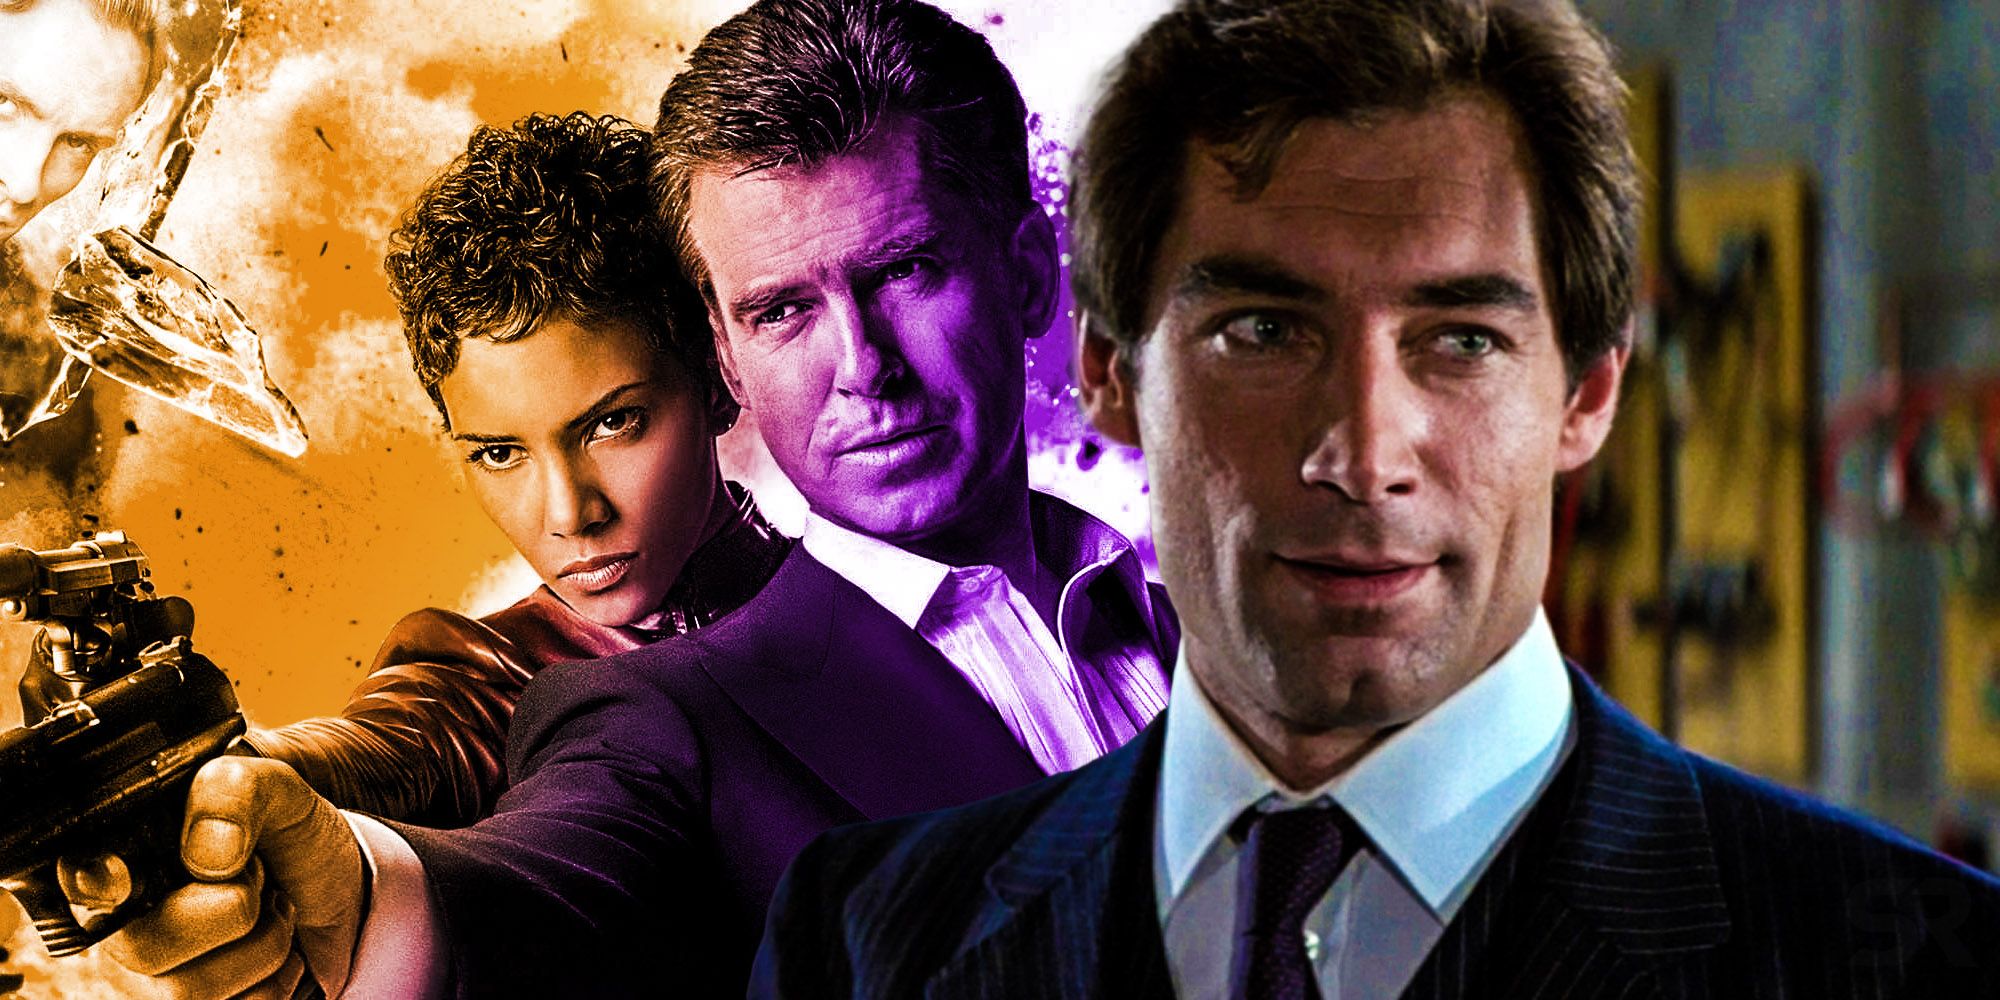 james bond the living day lights Die another Day pierce brosnan timothy dalton